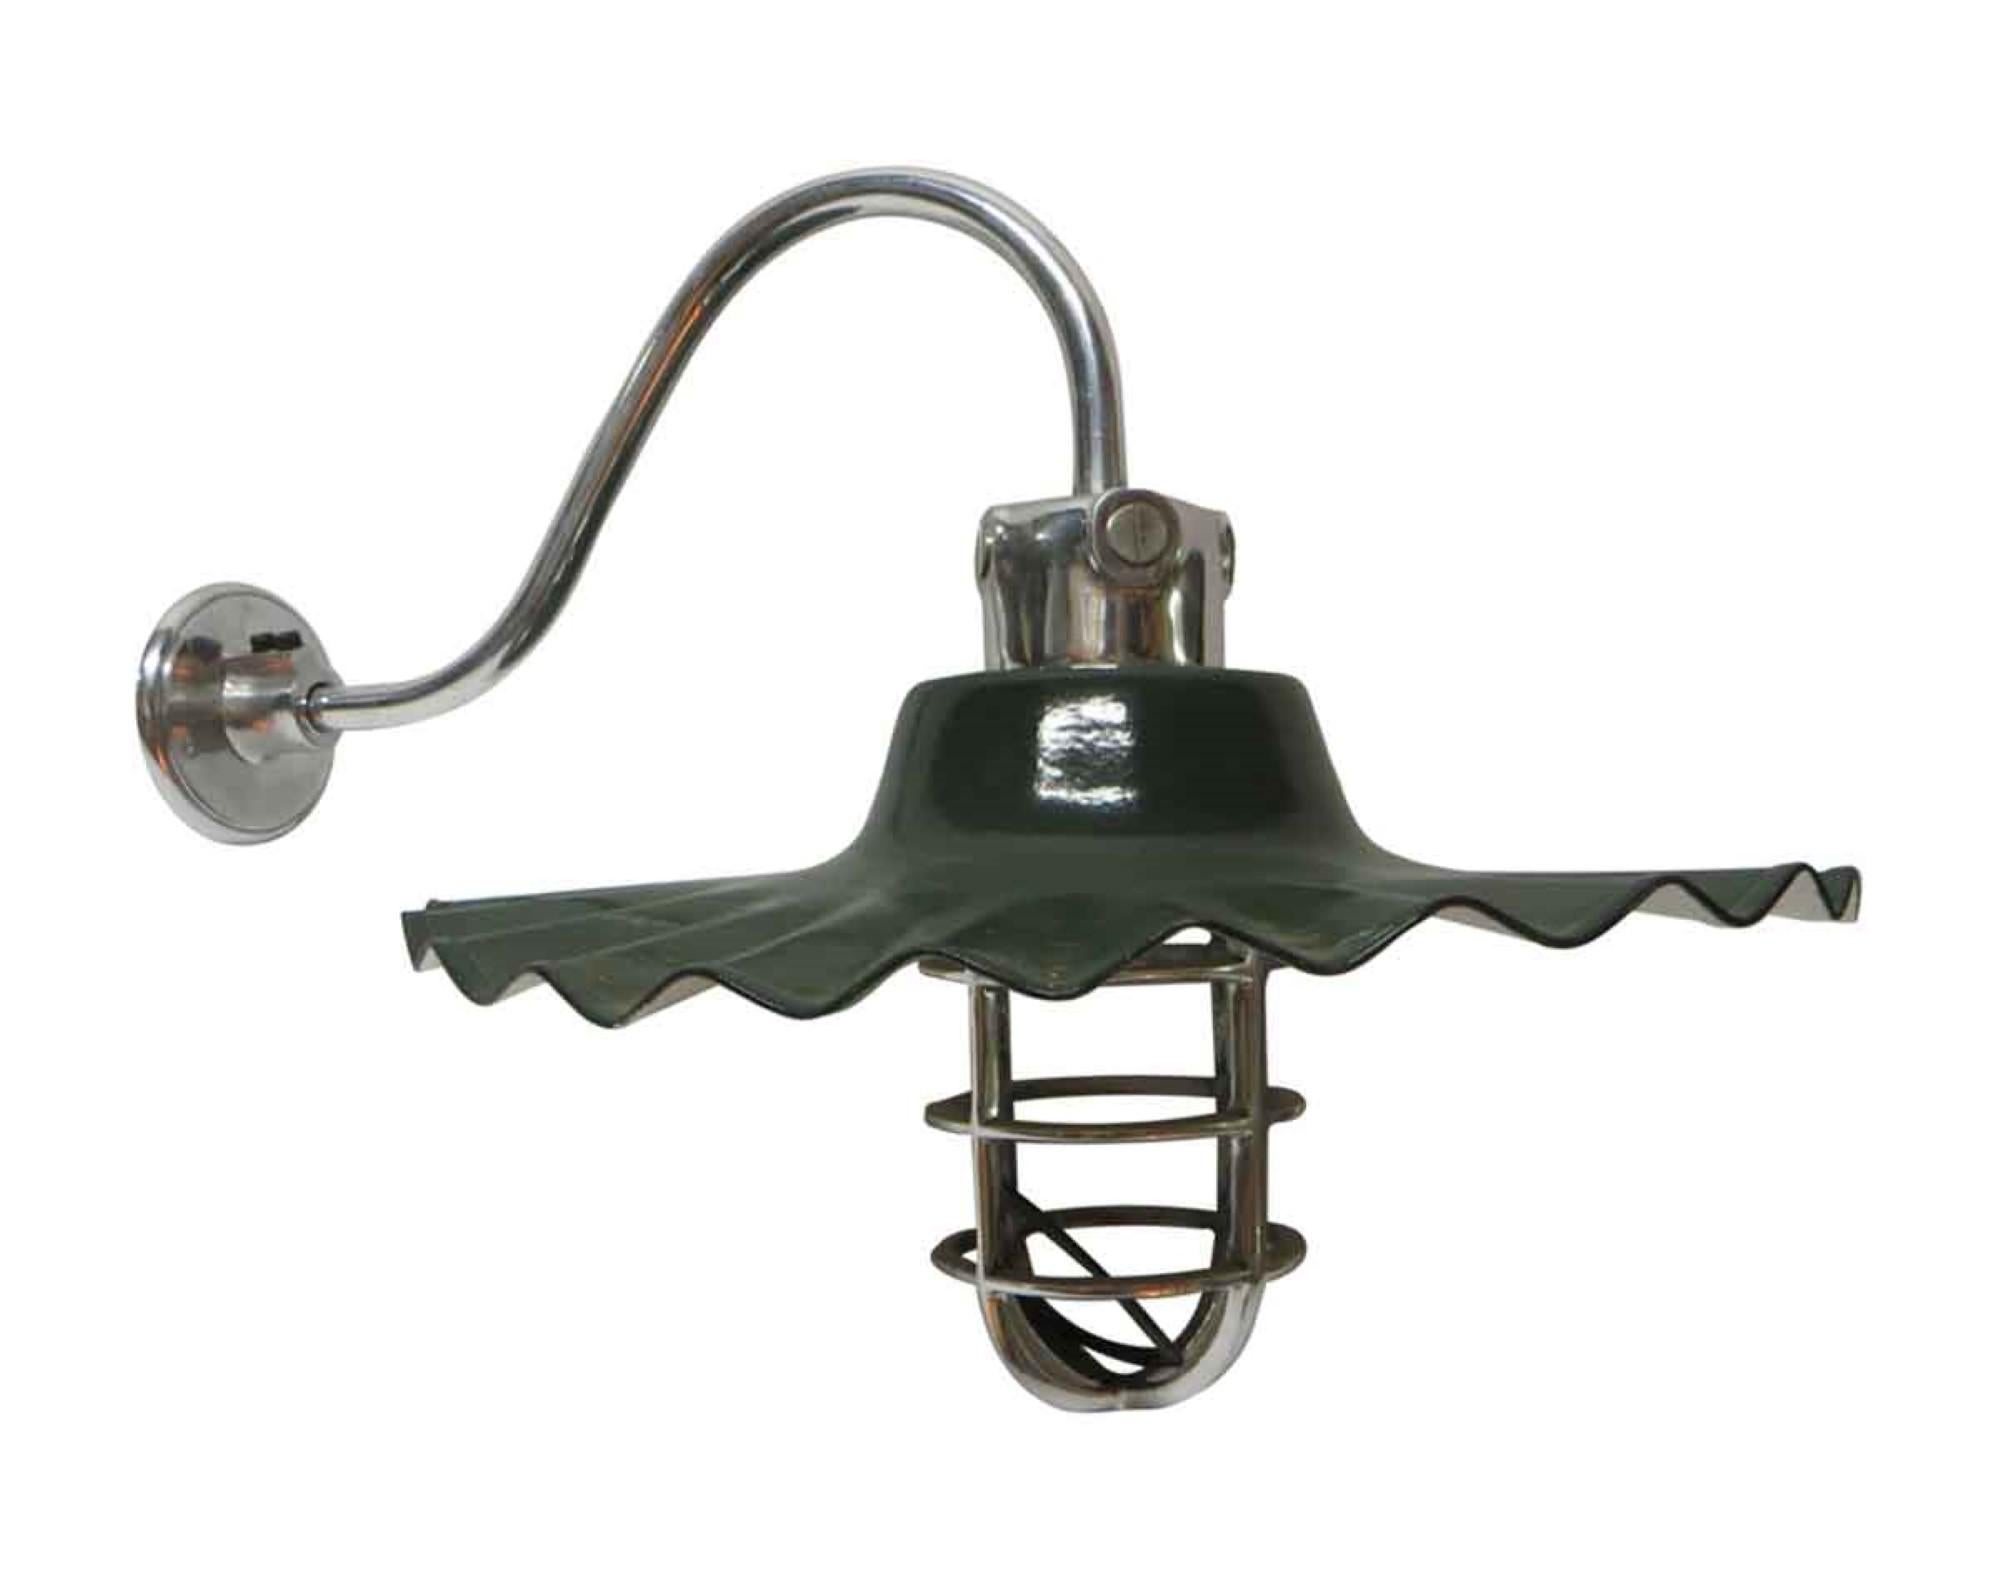 2010s green enameled steel ruffled shade with a nickel over brass arm and cage for the light bulb. This is a quality reproduction of an early 20th century style. This can be seen at our 400 Gilligan St location in Scranton, PA